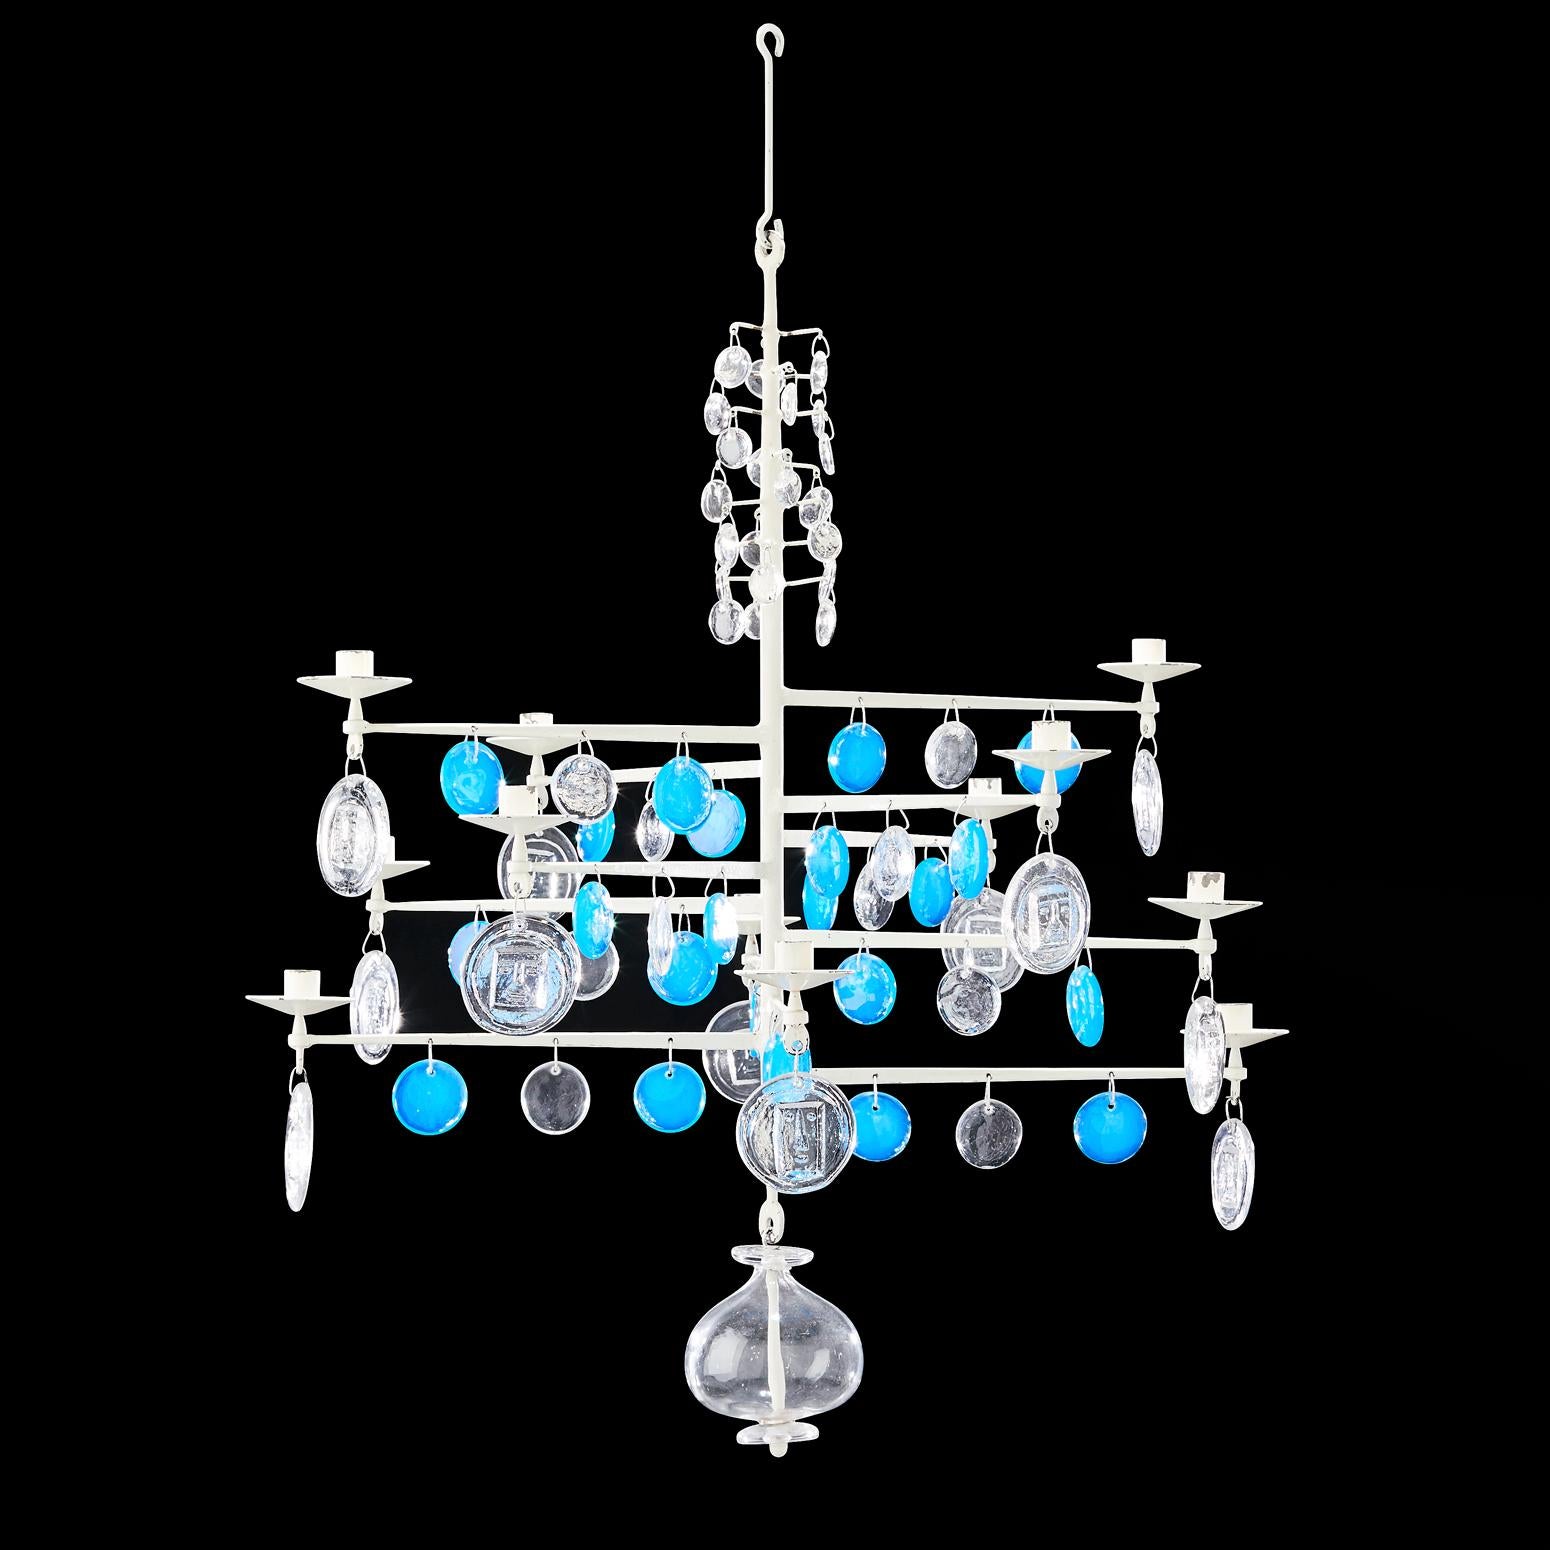 A are, Scandinavian Modern chandelier in wrought steel structure designed by Erik Hoglund (Höglund) and executed by Boda Nova Glassworks / Axel Stromberg Ironworks, Sweden, 1971. 
It is suited for 12 candles, ornamented with blue and clear, mouth